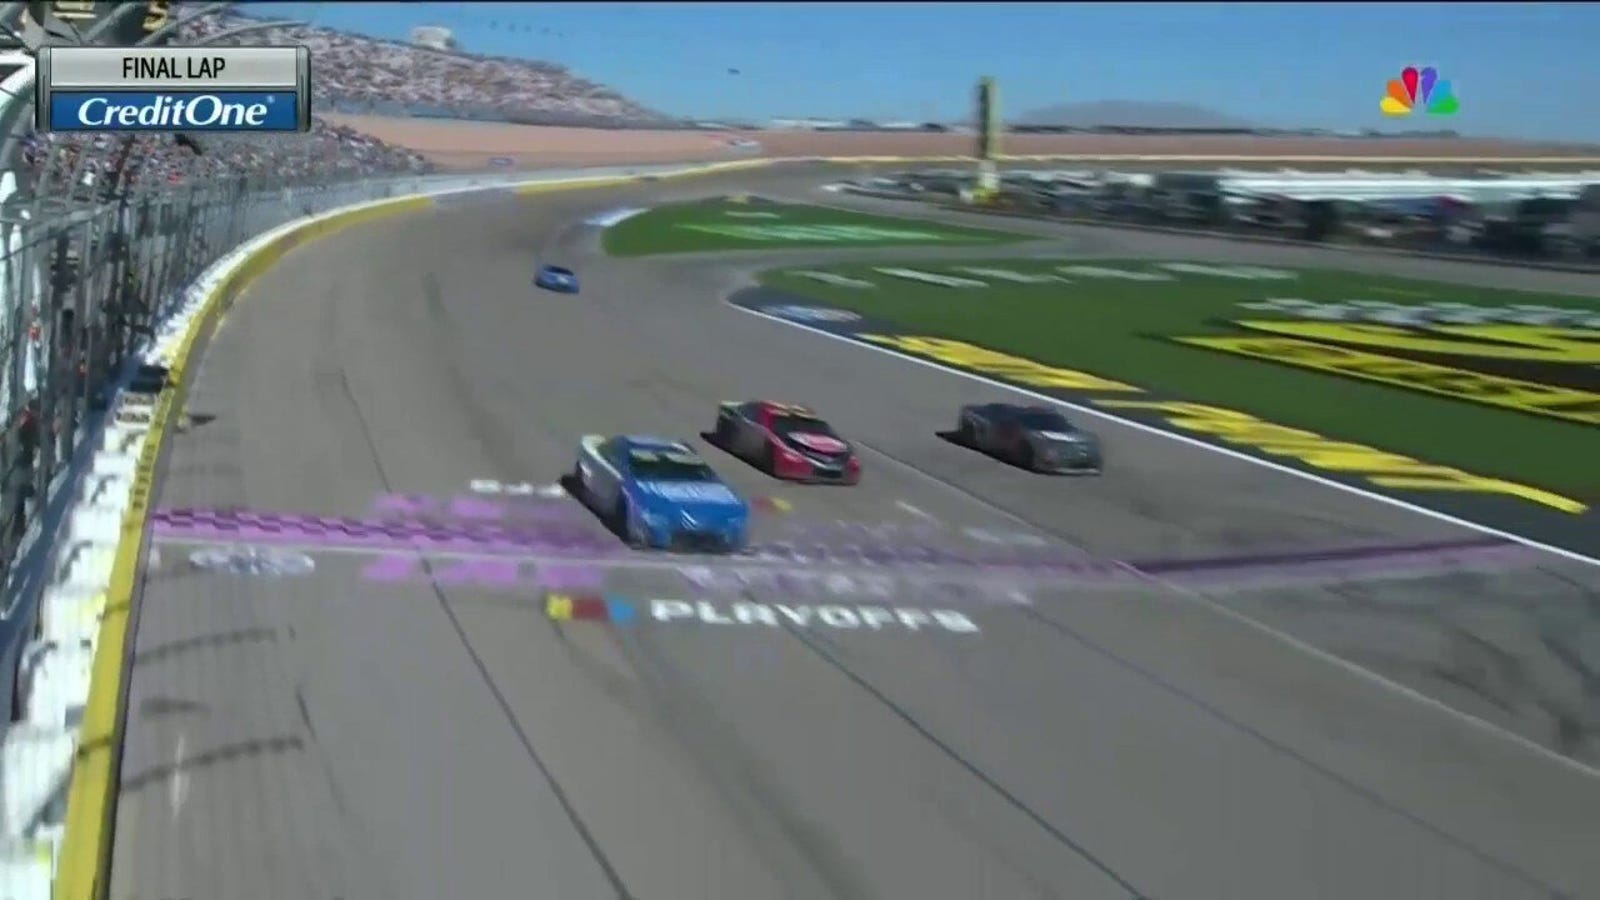 Kyle Larson takes the checkered flag to make it to the Championship 4